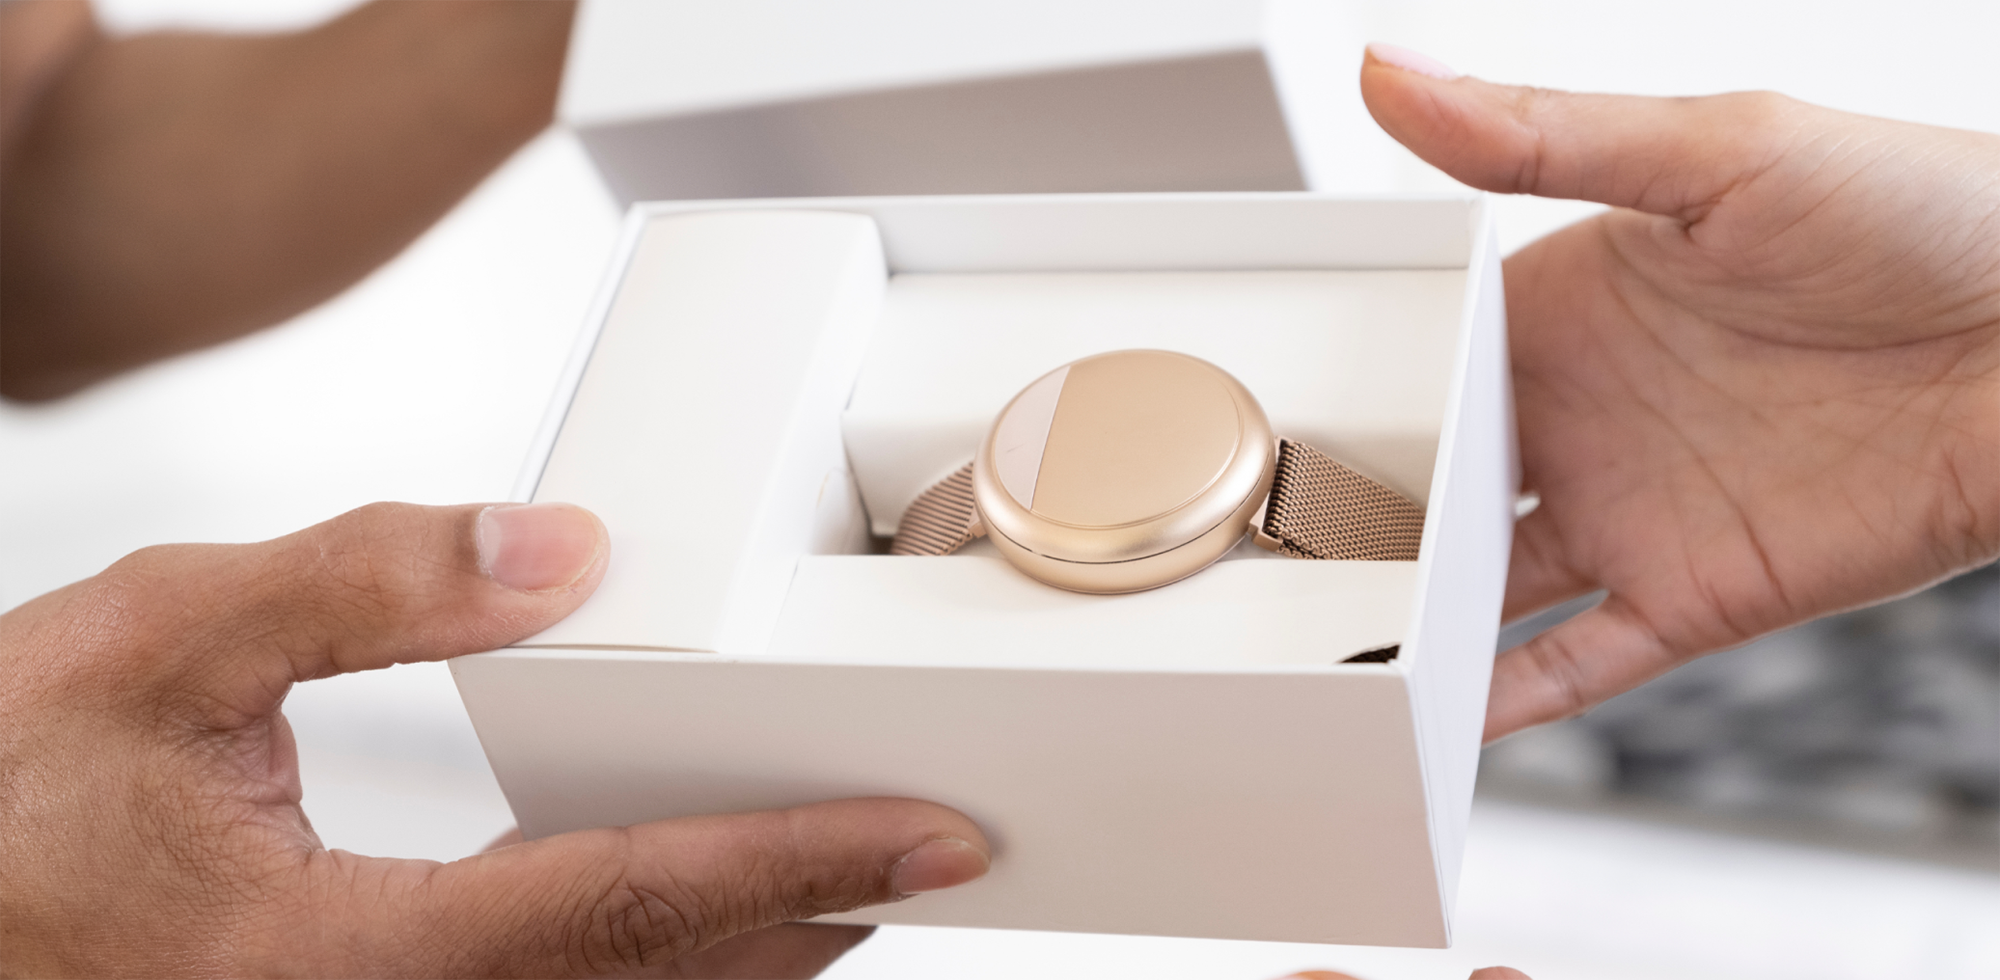 Hands holding the rose gold Embr Wave 2 bracelet in its white box.